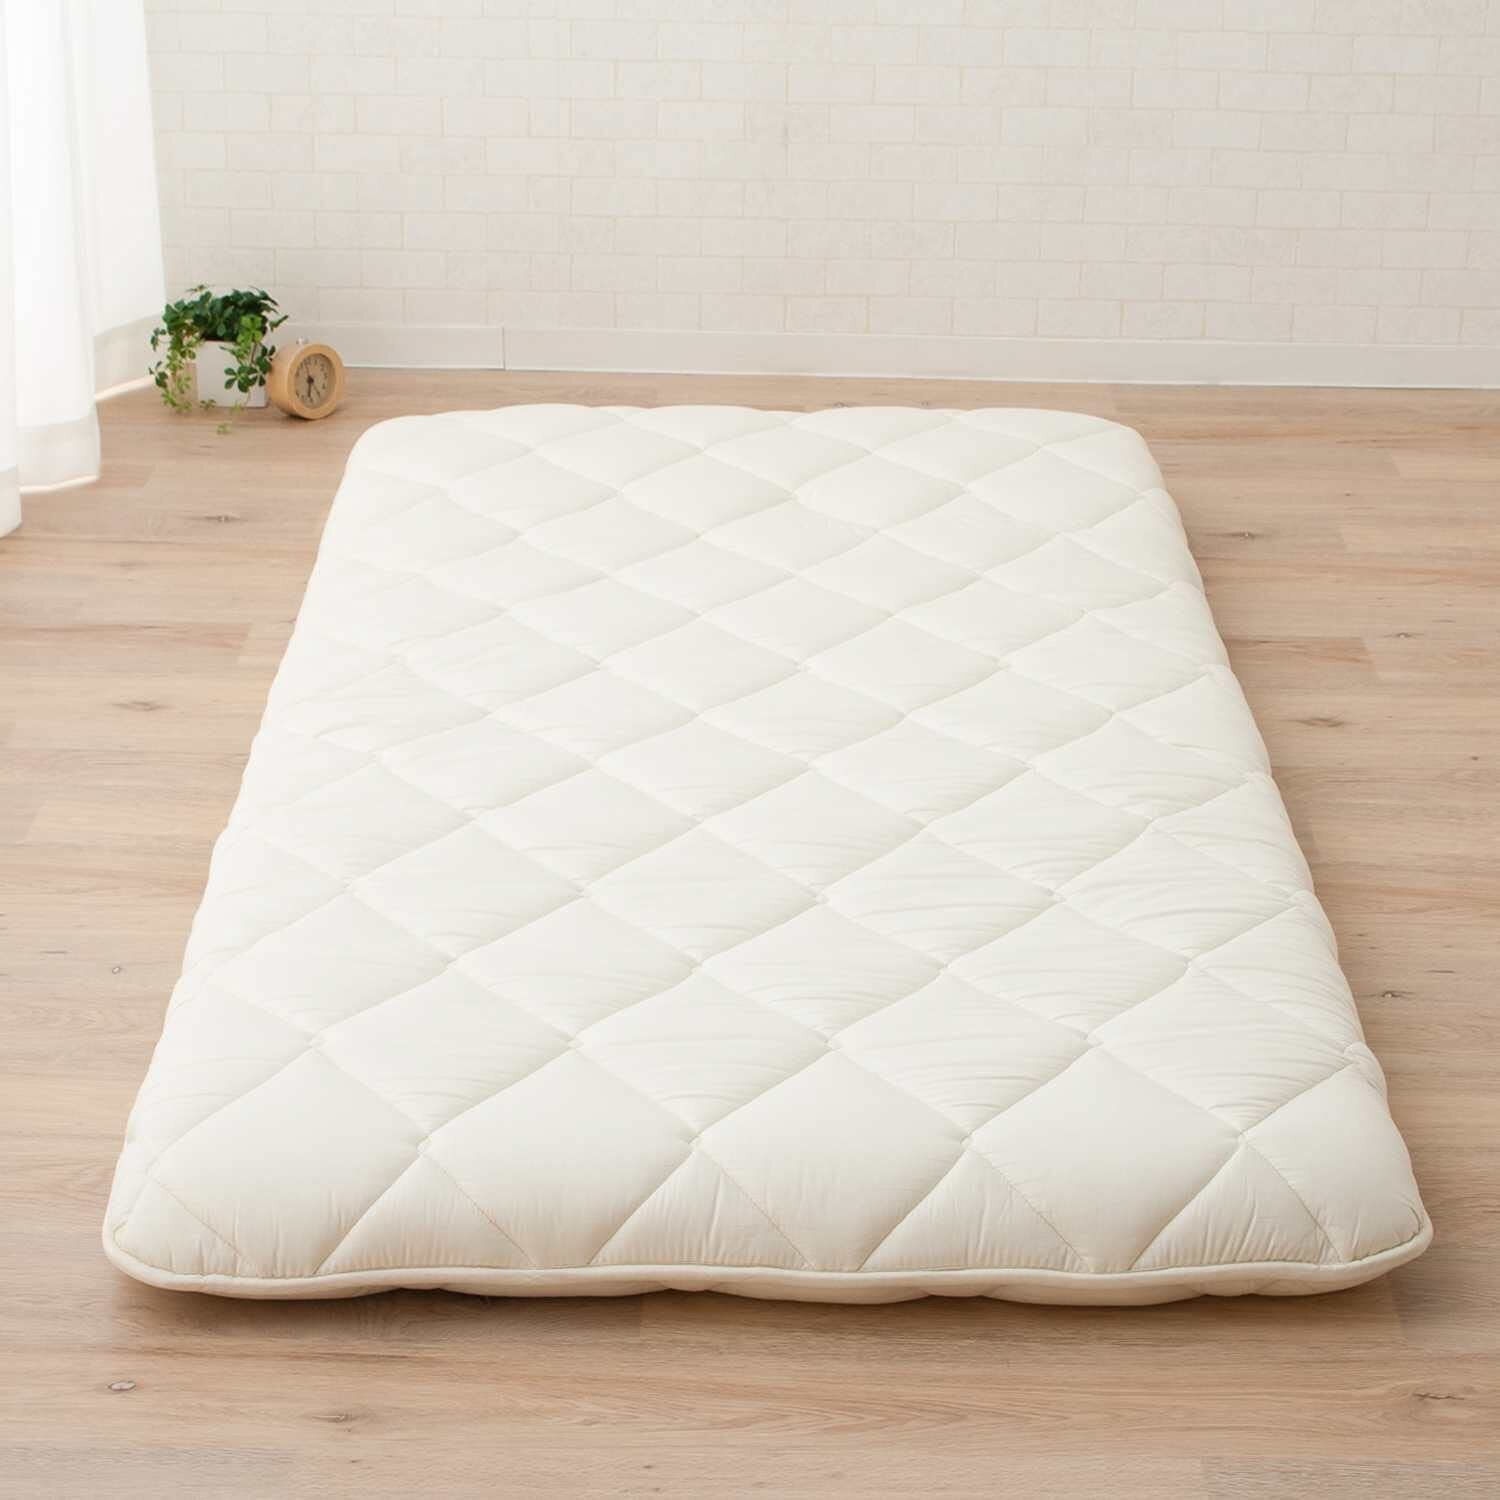 Quilted Cotton Mattress With Three Layers